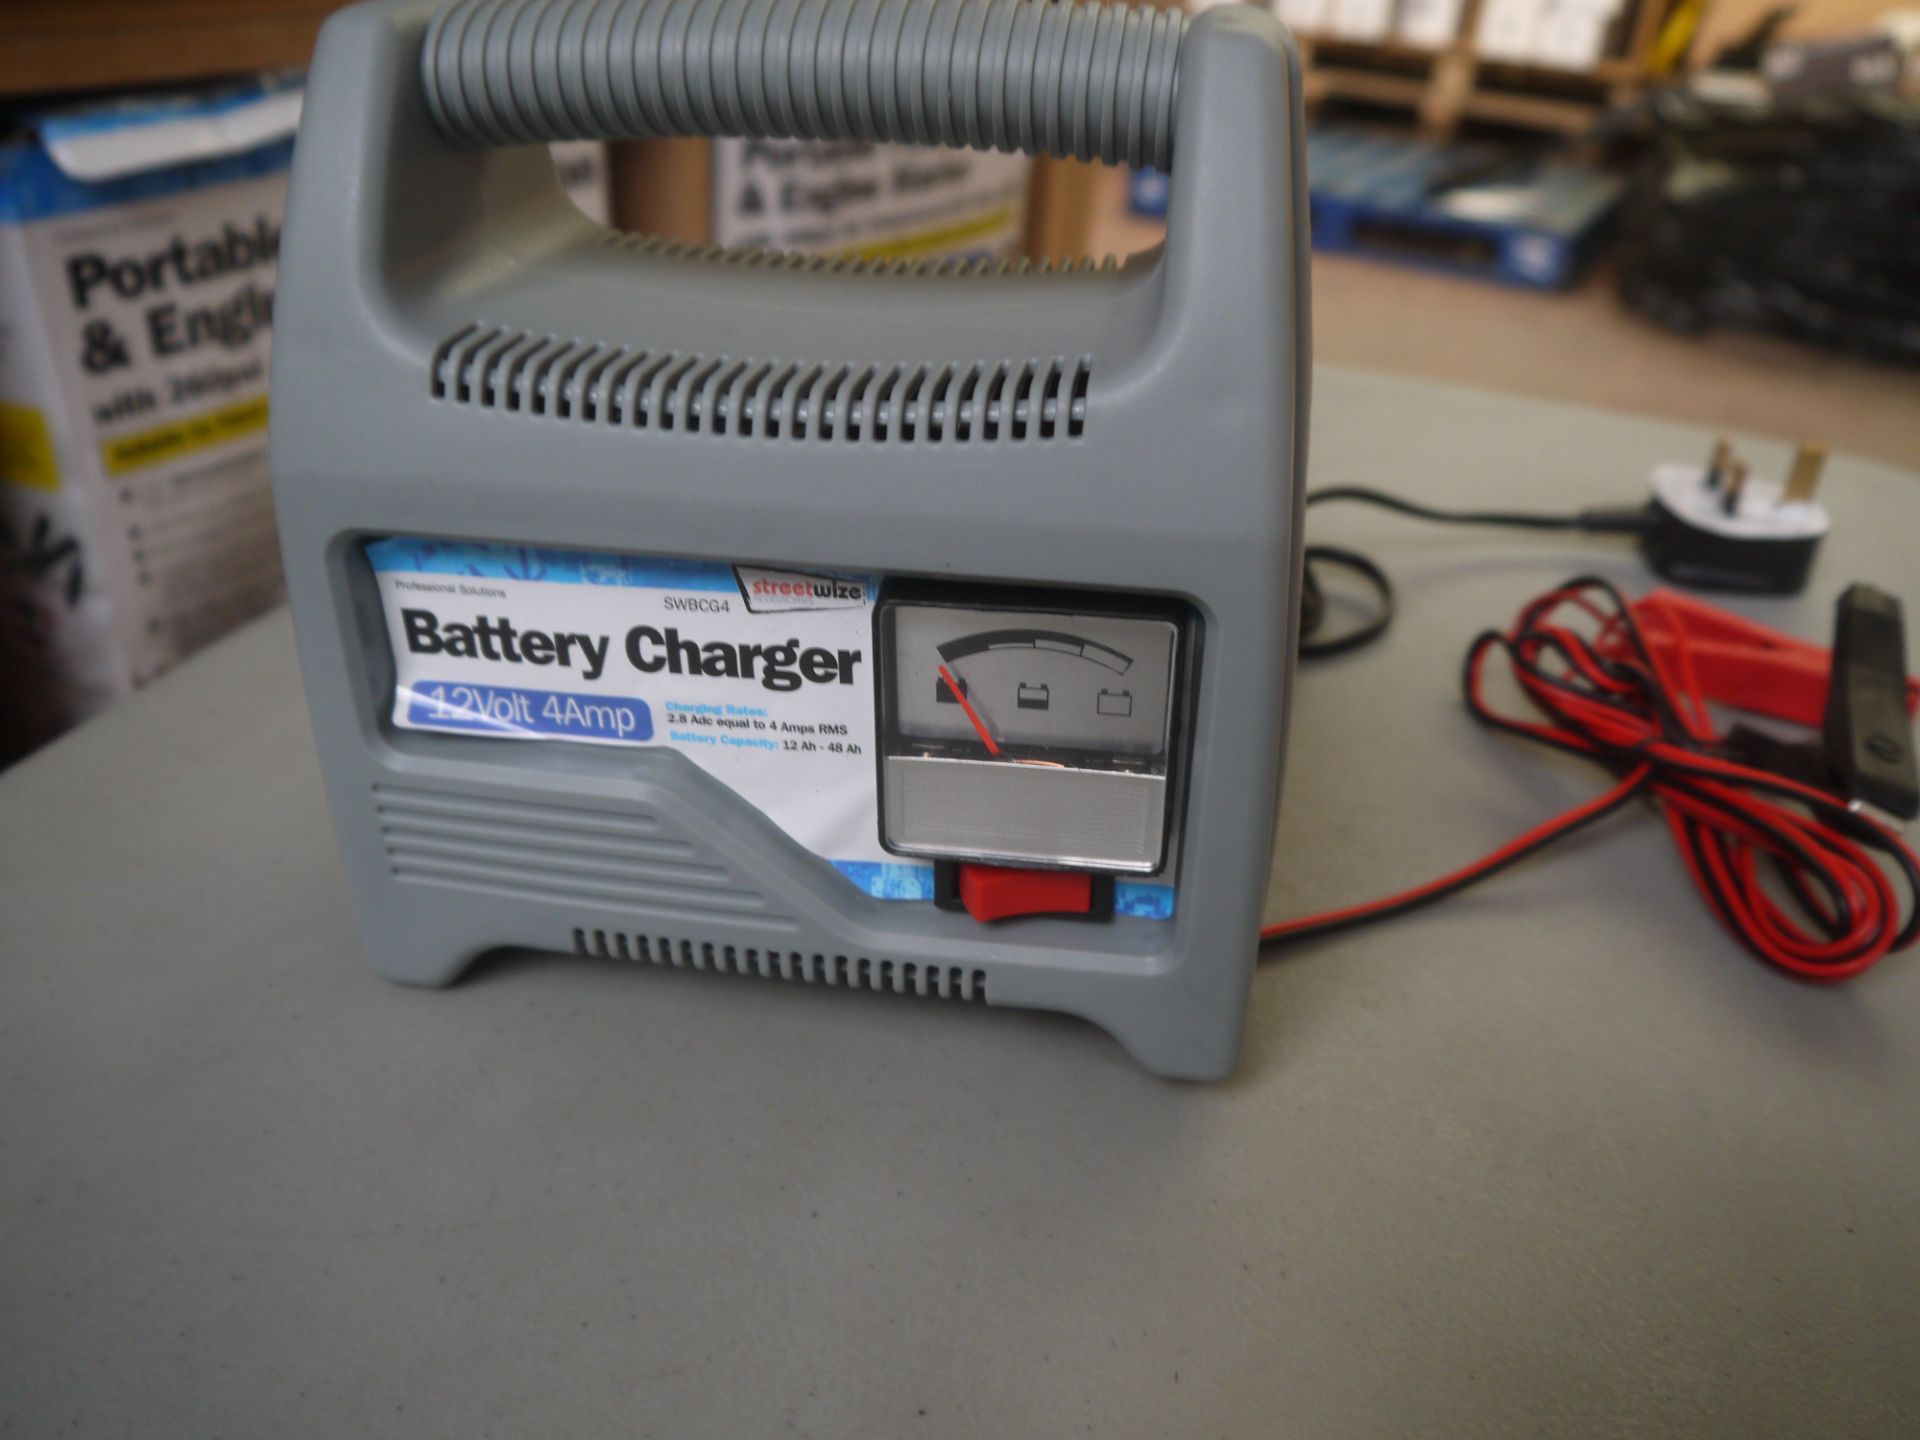 StreetWize 12V 4Amp Battery Charger. Boxed.